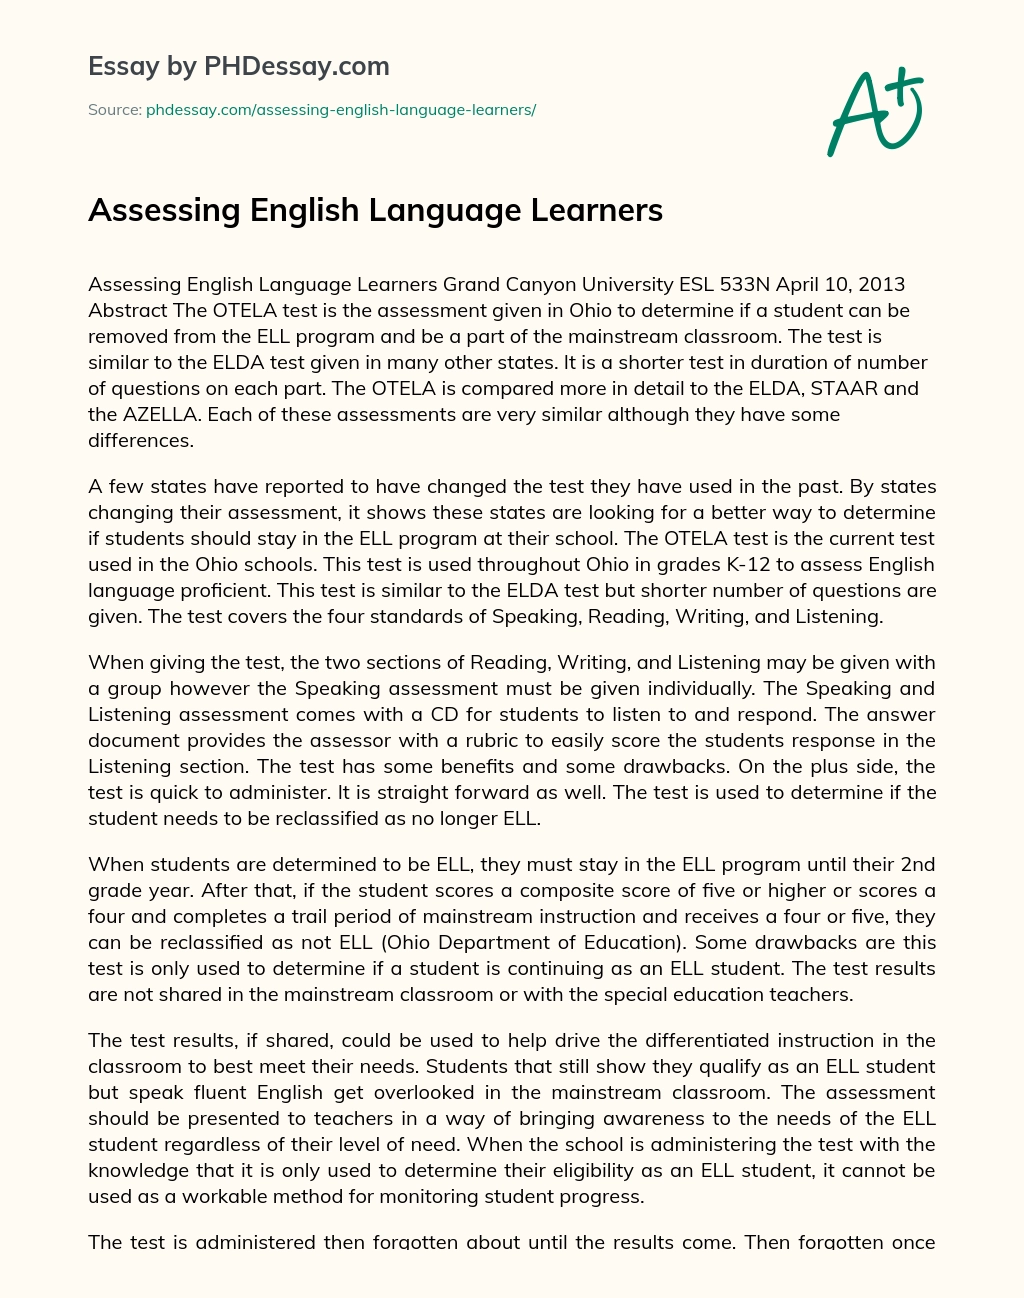 Assessing English Language Learners essay